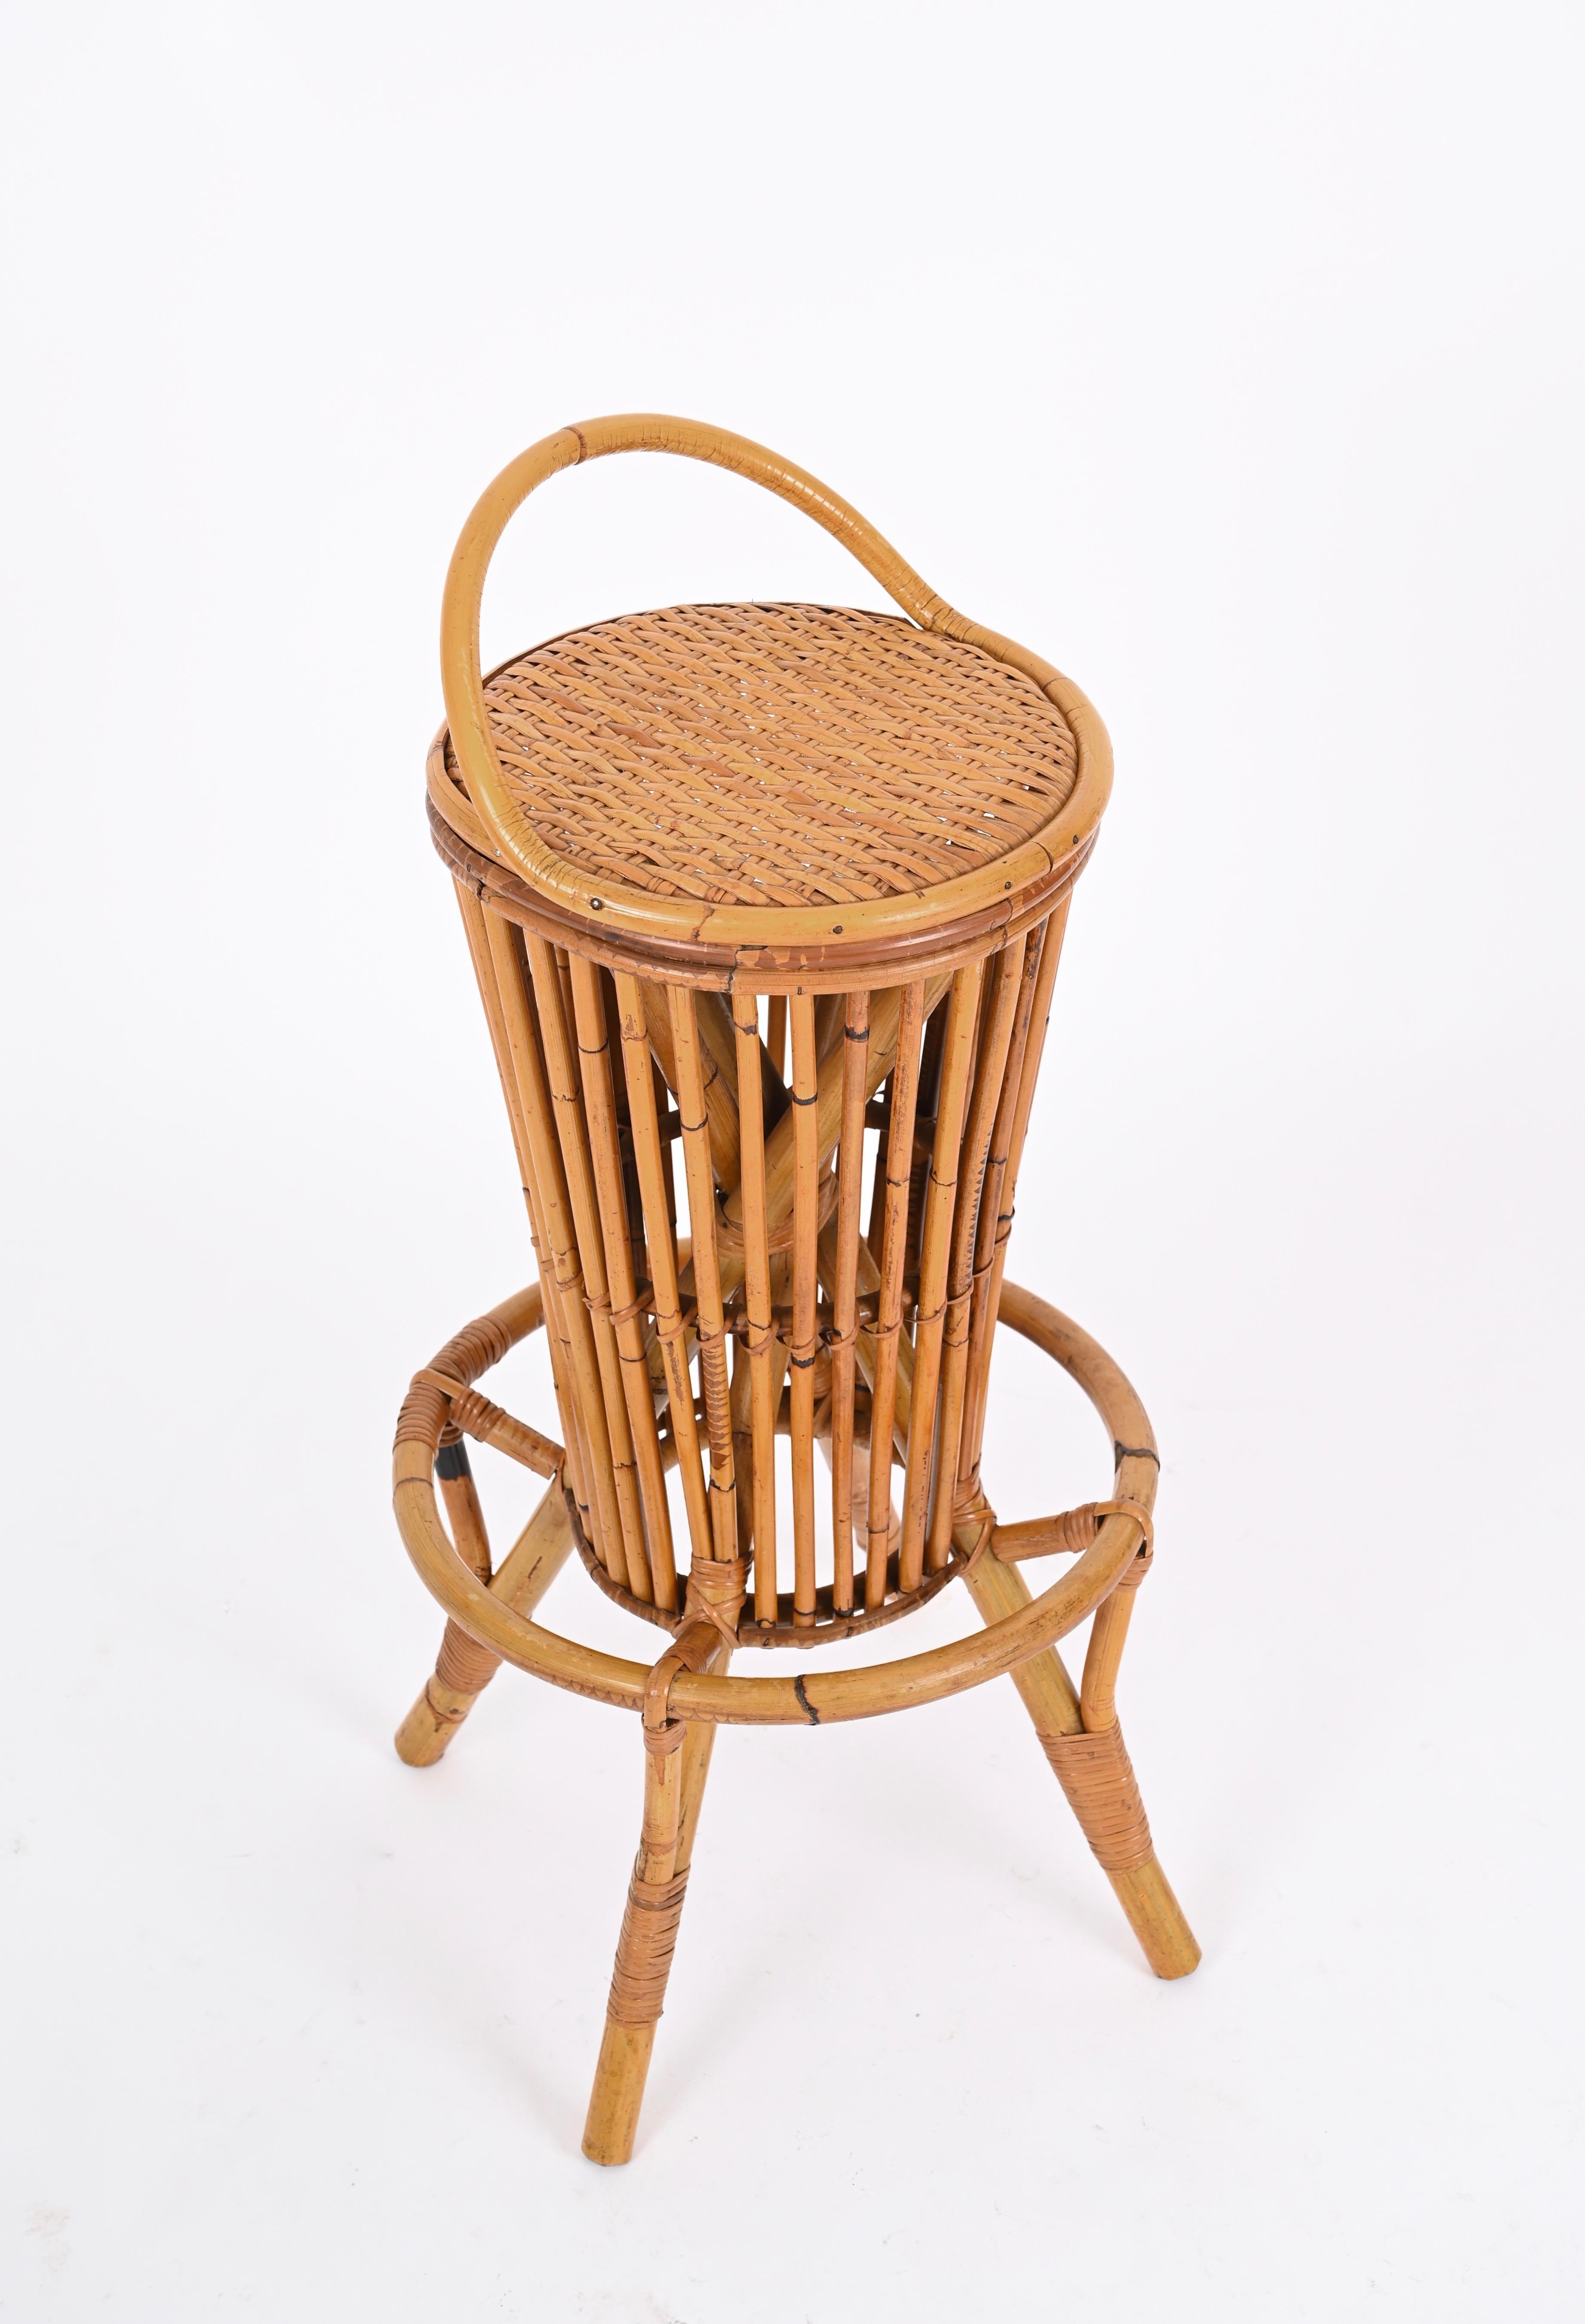 Dry Bar with Two Stools in Rattan, Bamboo and Wicker by Tito Agnoli, Italy 1950s For Sale 11